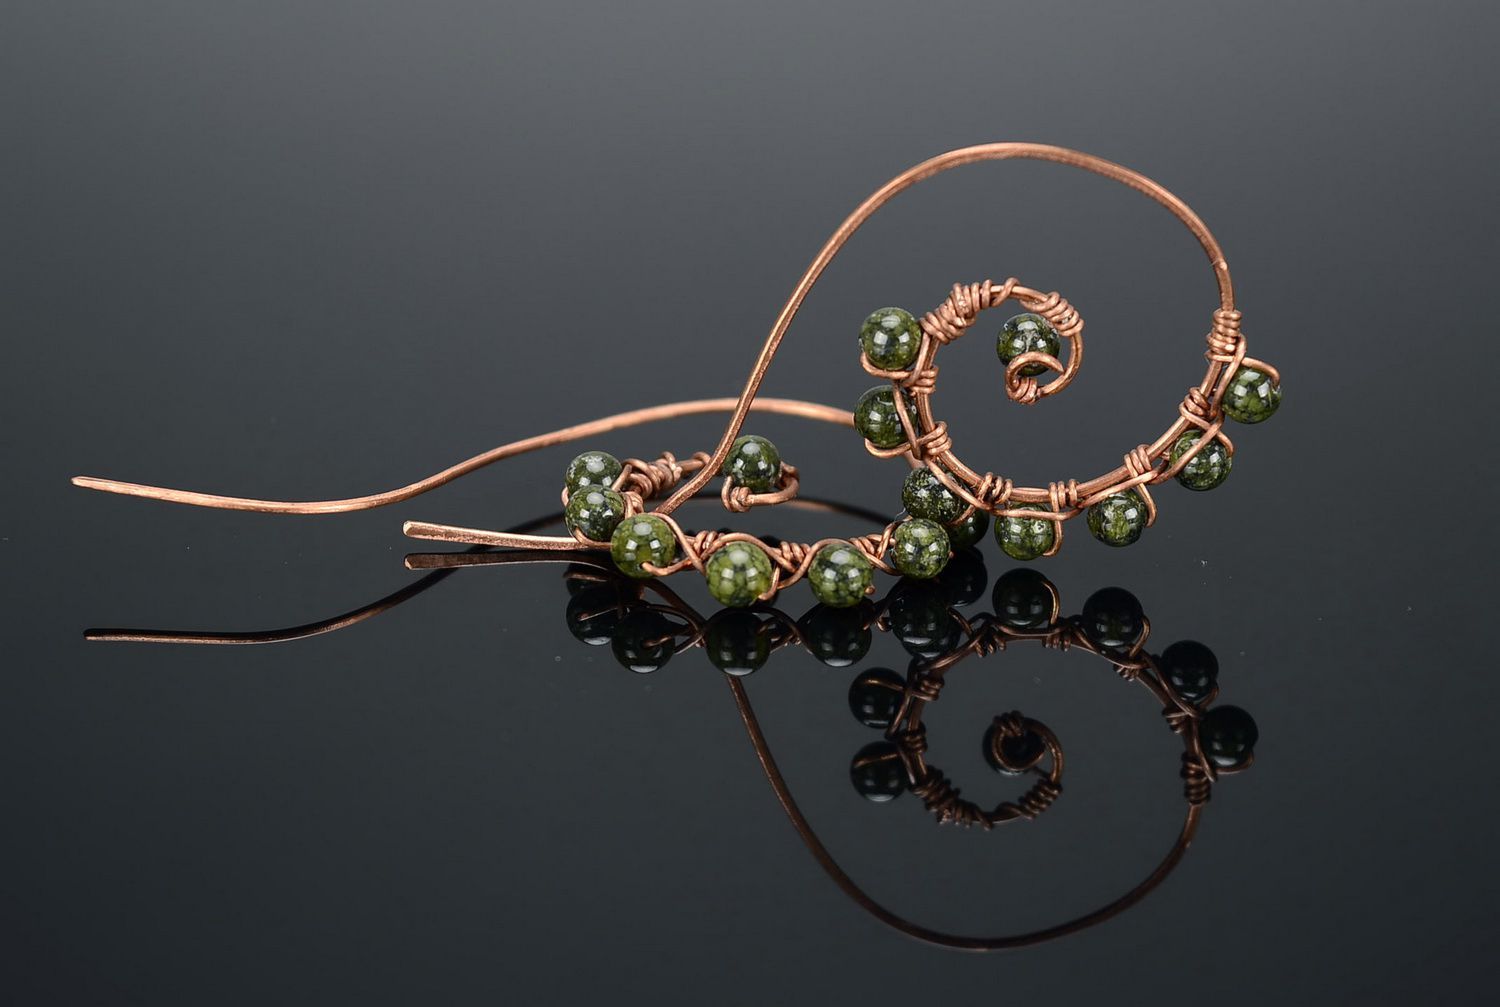 Eaarrings made of copper wire, stone - serpentine photo 1